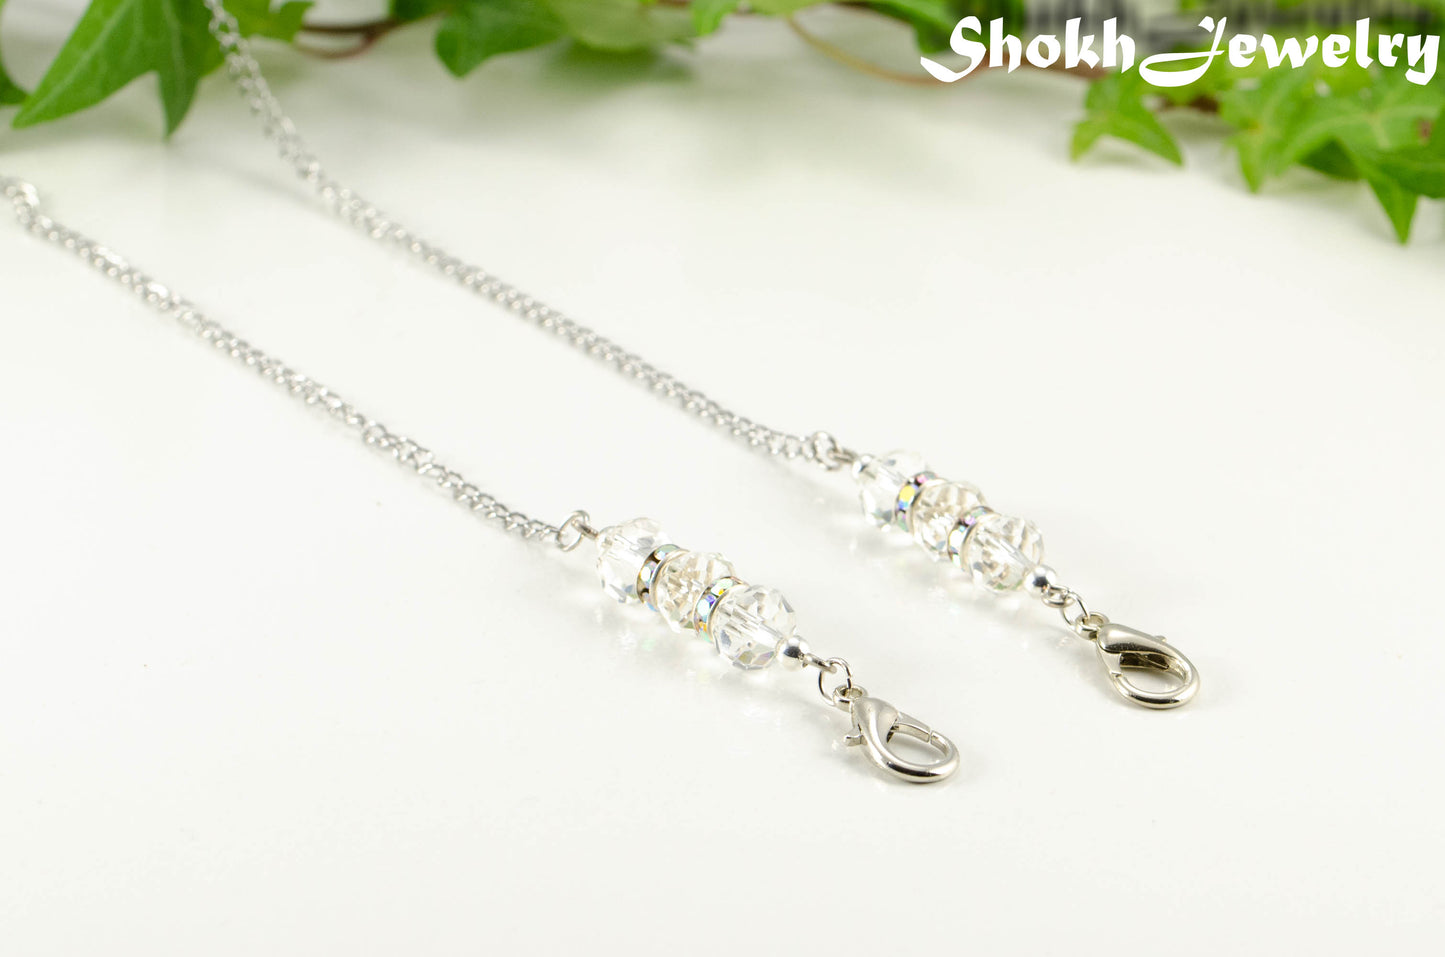 Clear Glass and Sparkly Rhinestone Eyeglass Chain.